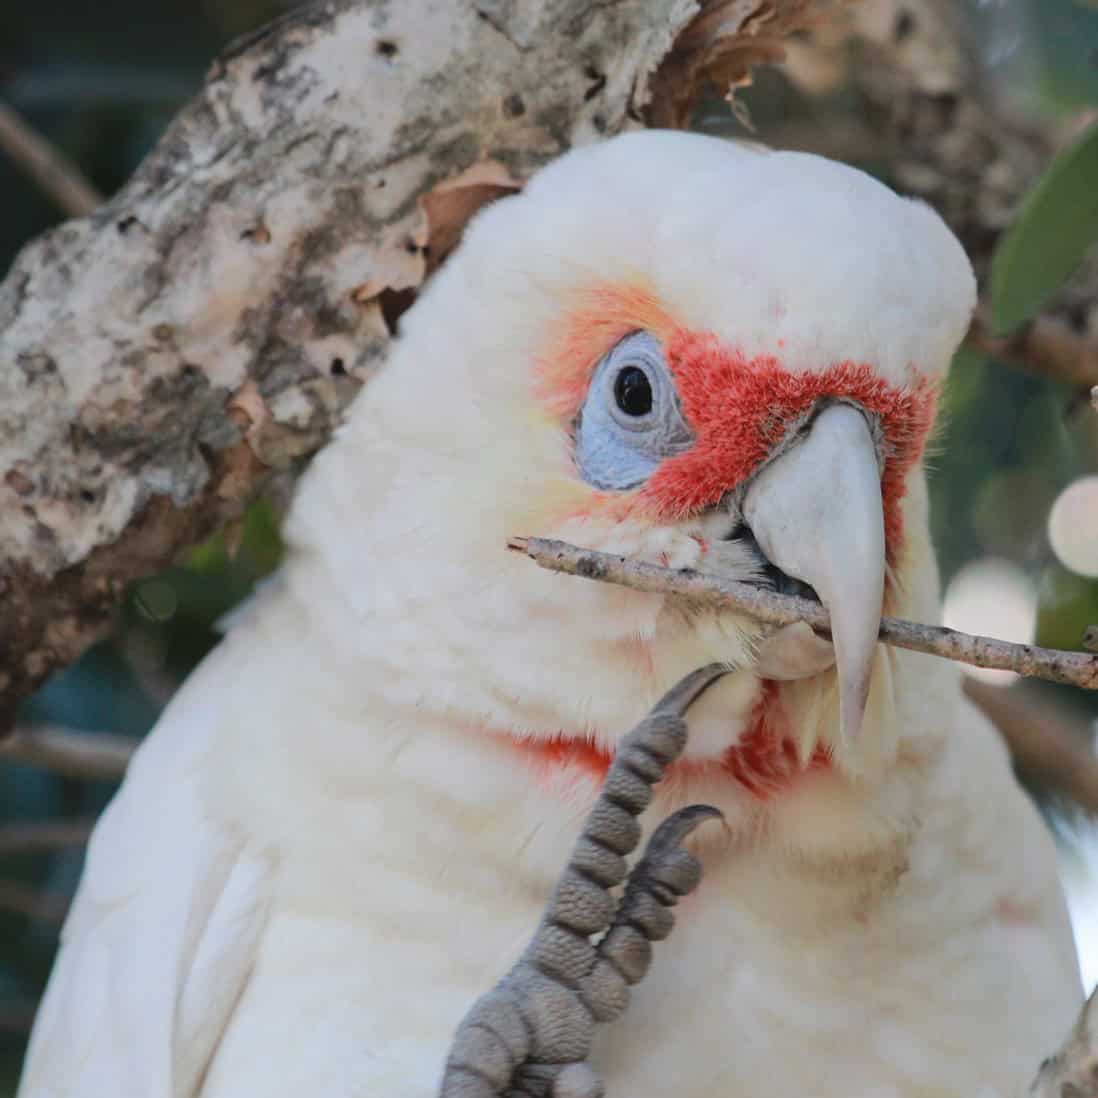 How Do Parrots Engage in Foraging and Enrichment?